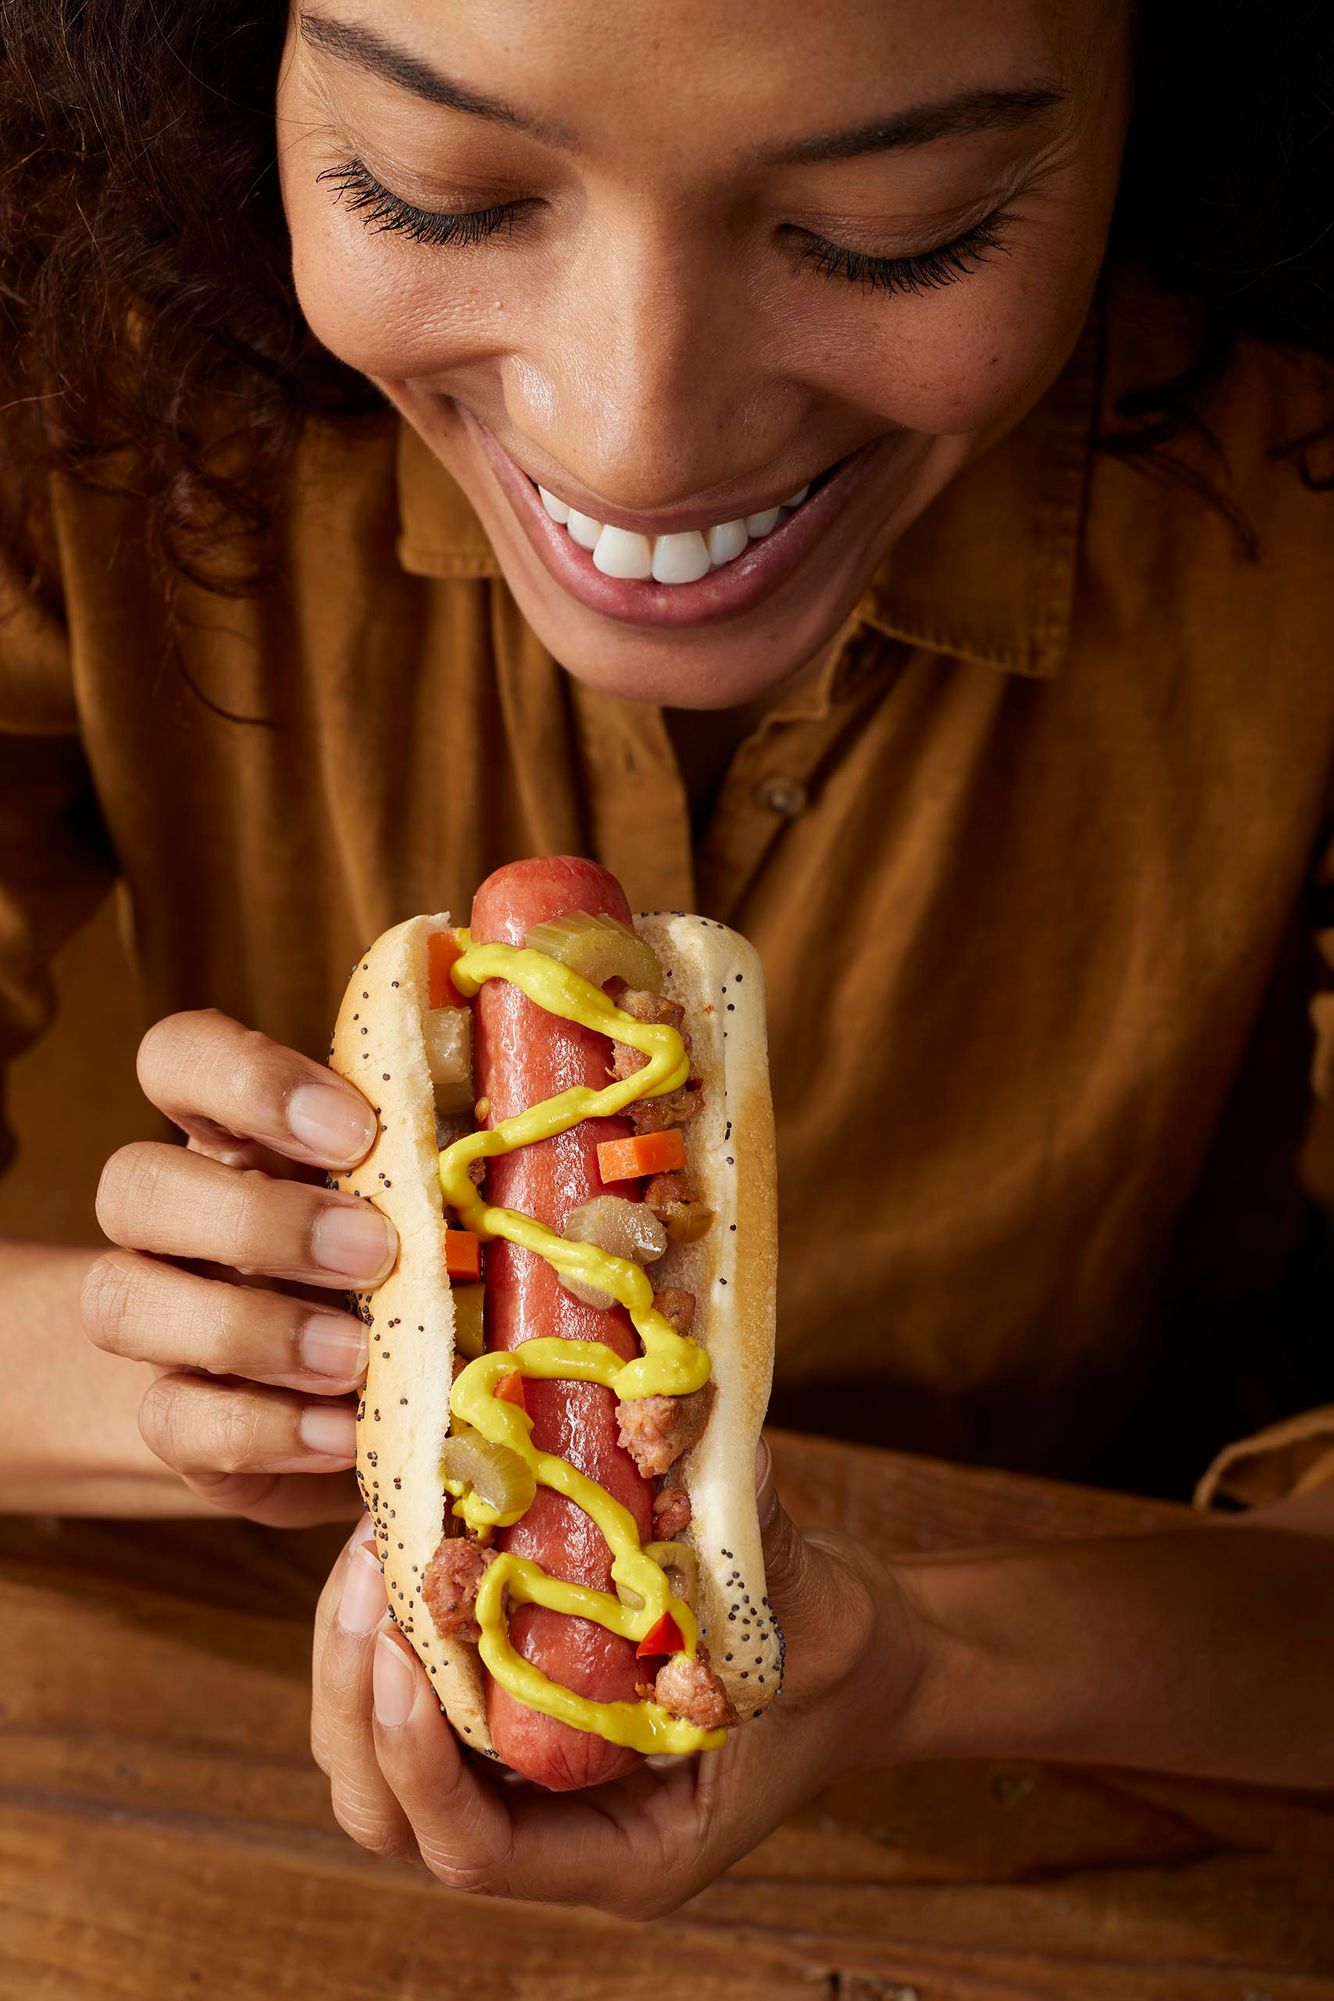 Hot Dog Advertising By Chicago Lifestyle Food Photographer Jeff Schear